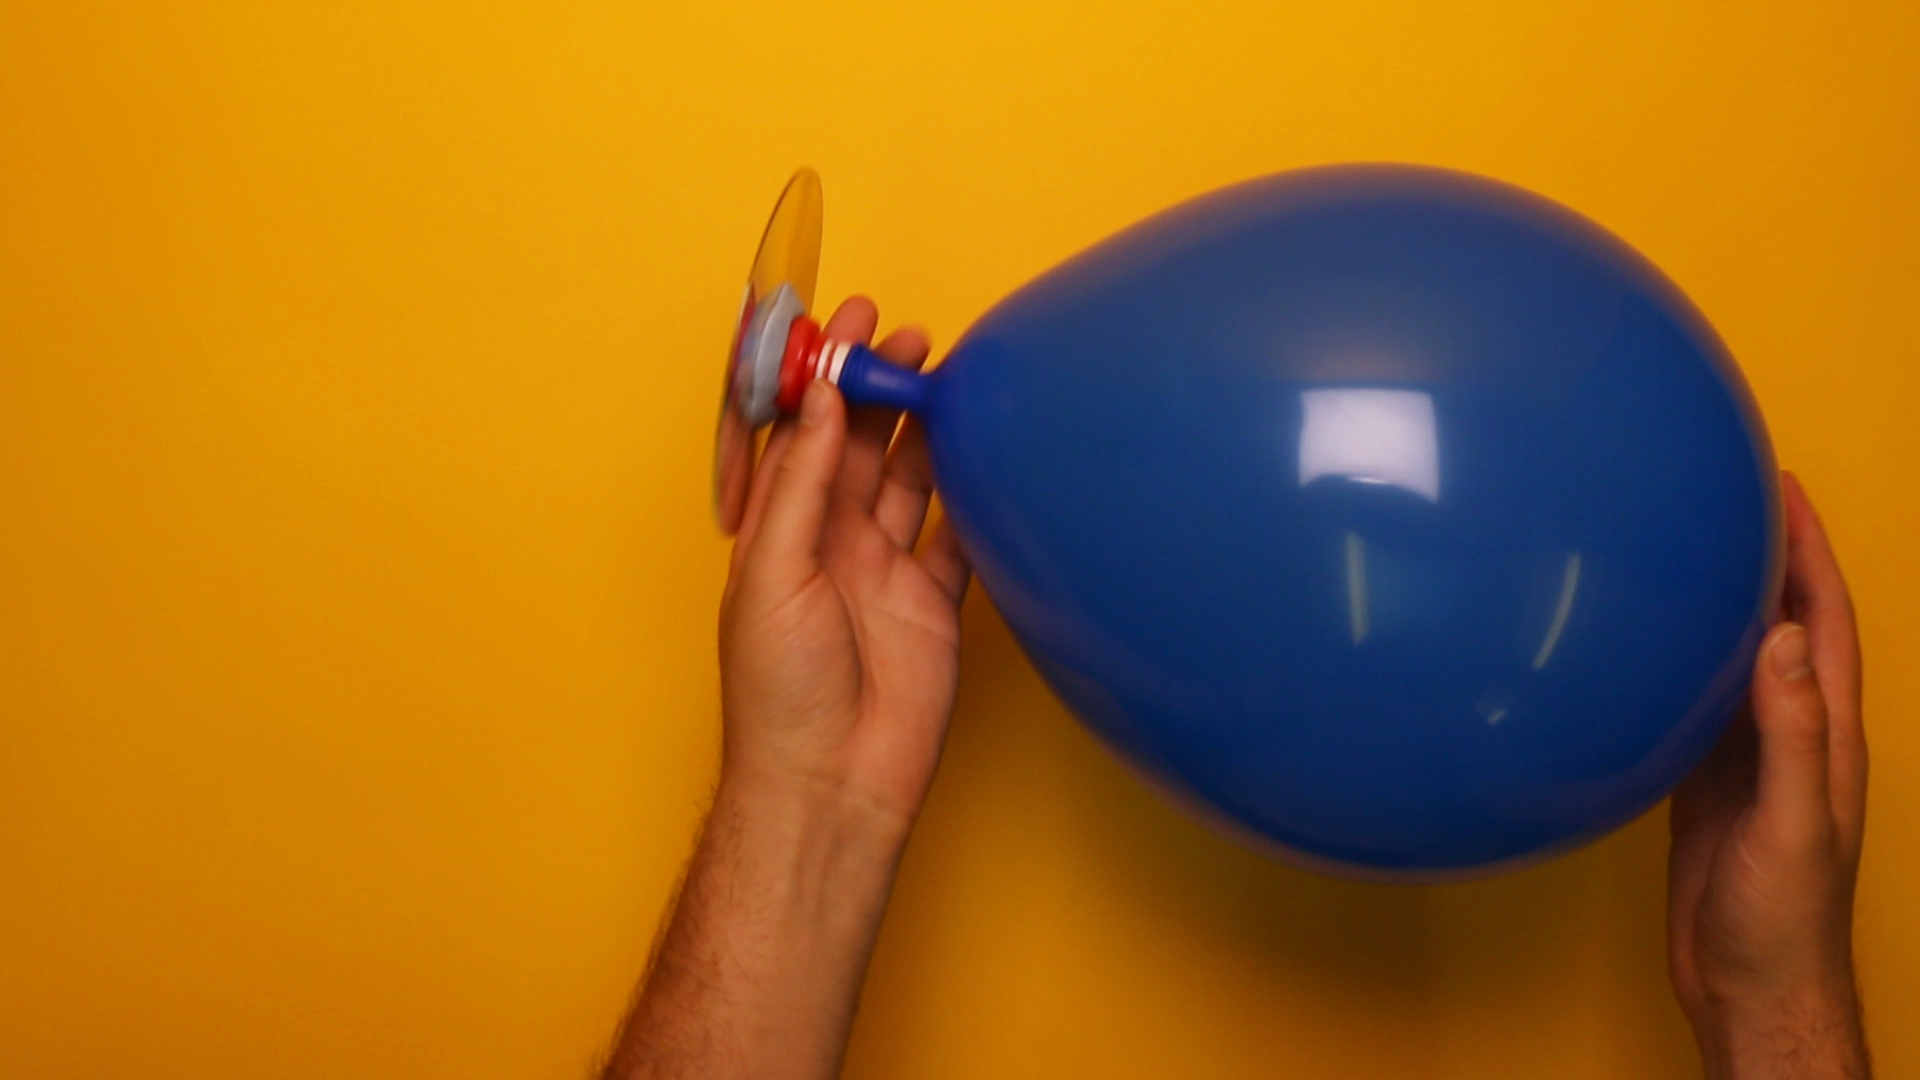 Inflate the balloon by blowing through the hole in the CD. Close the sports cap to keep the air in!